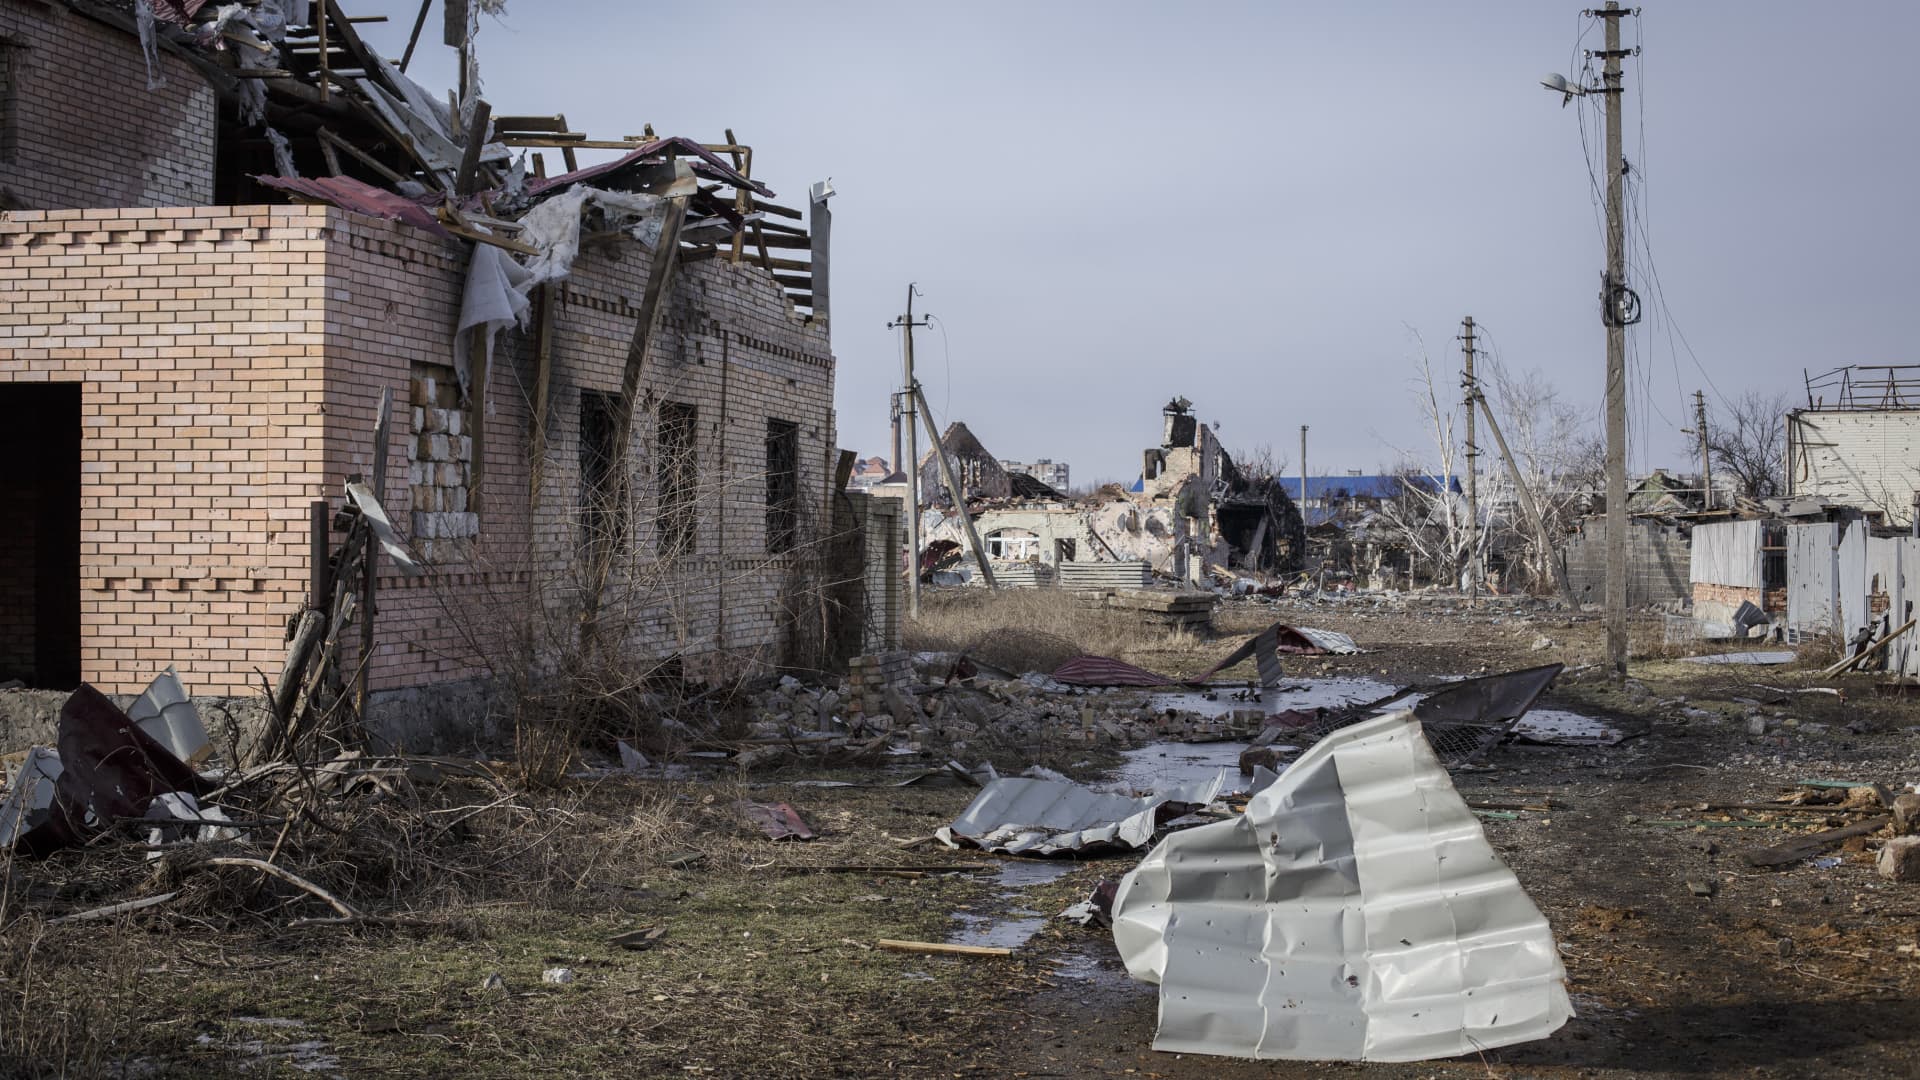 A view of damage after attacks as Russia-Ukraine war continues in Bakhmut, Ukraine on Feb. 24, 2023.